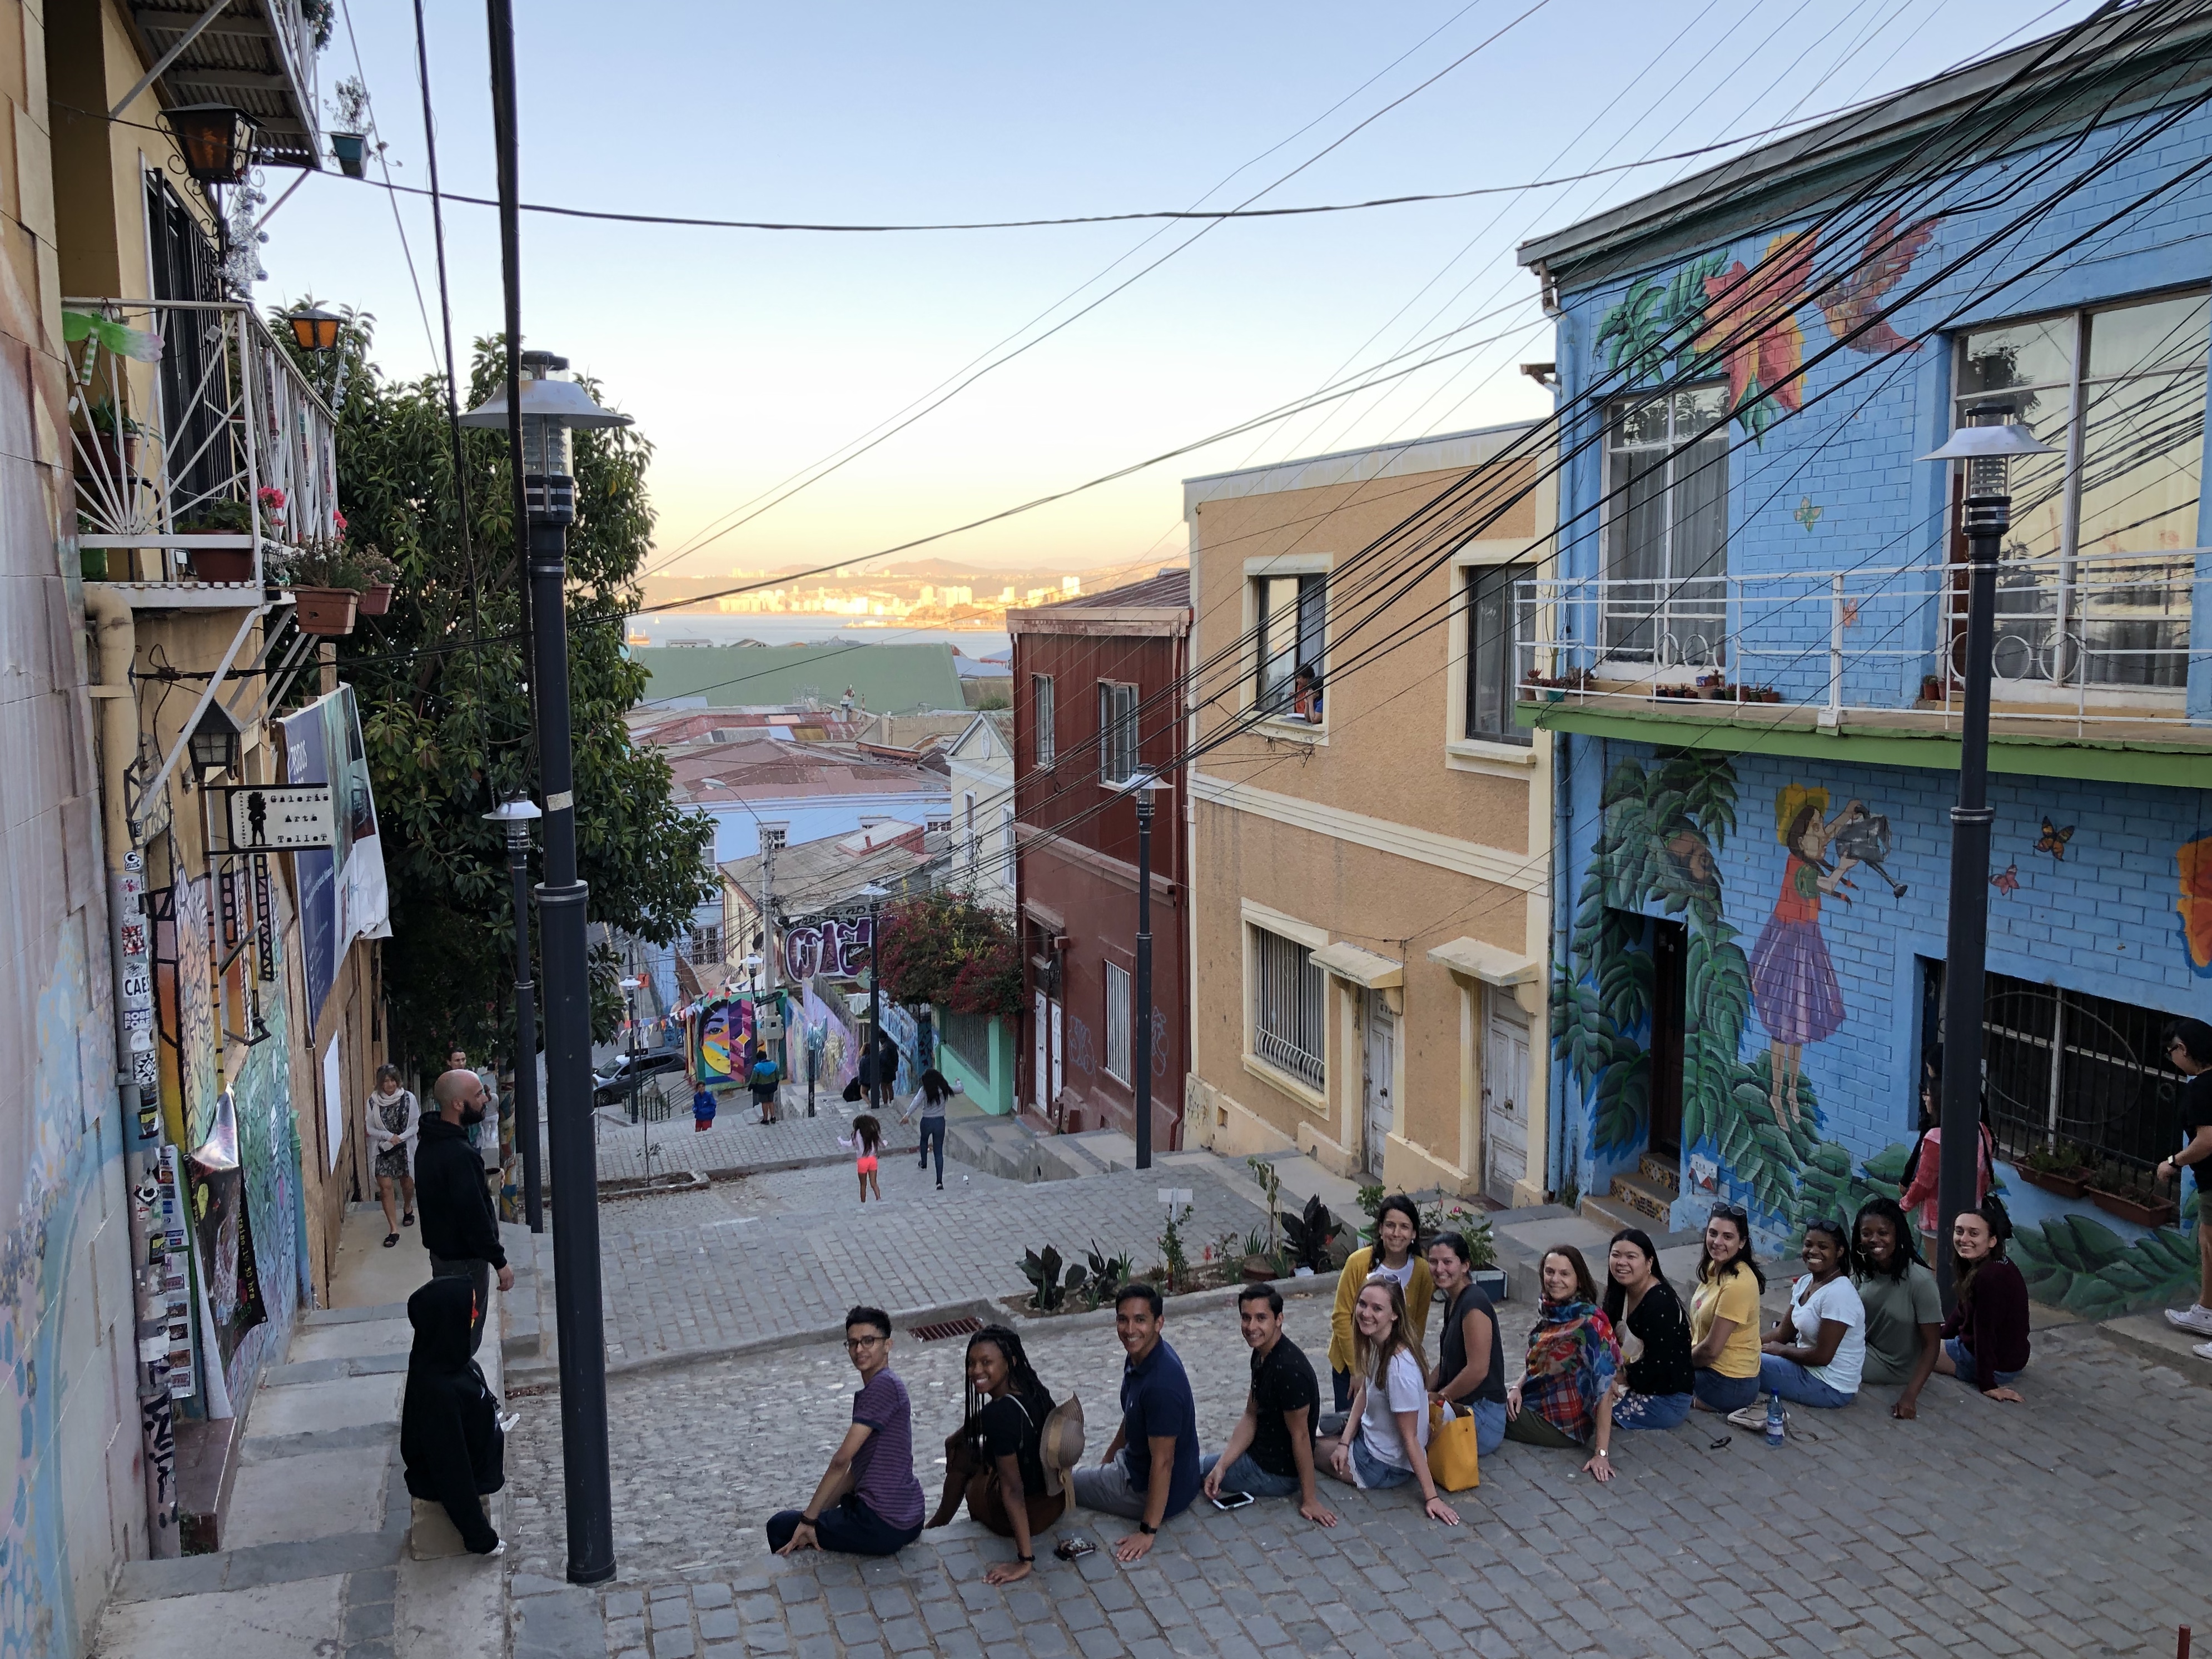 A group of college students sitting on a street between colorful buildings.